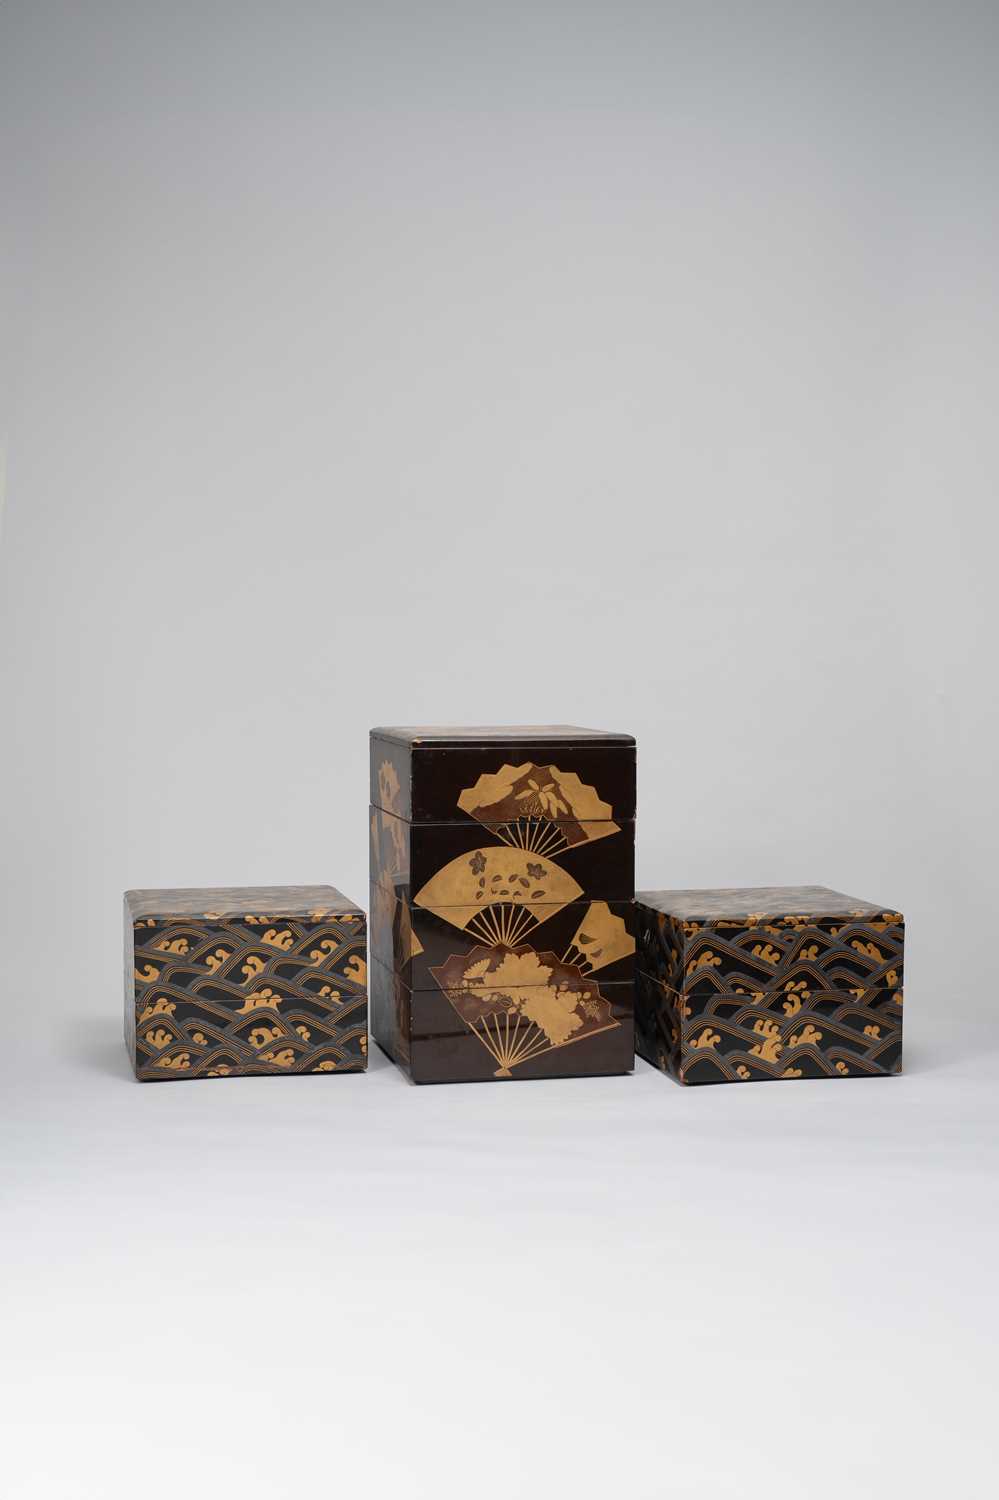 NO RESERVE THREE JAPANESE LACQUER JUBAKO (PICNIC BOXES AND COVERS) MEIJI ERA, 19TH/20TH CENTURY